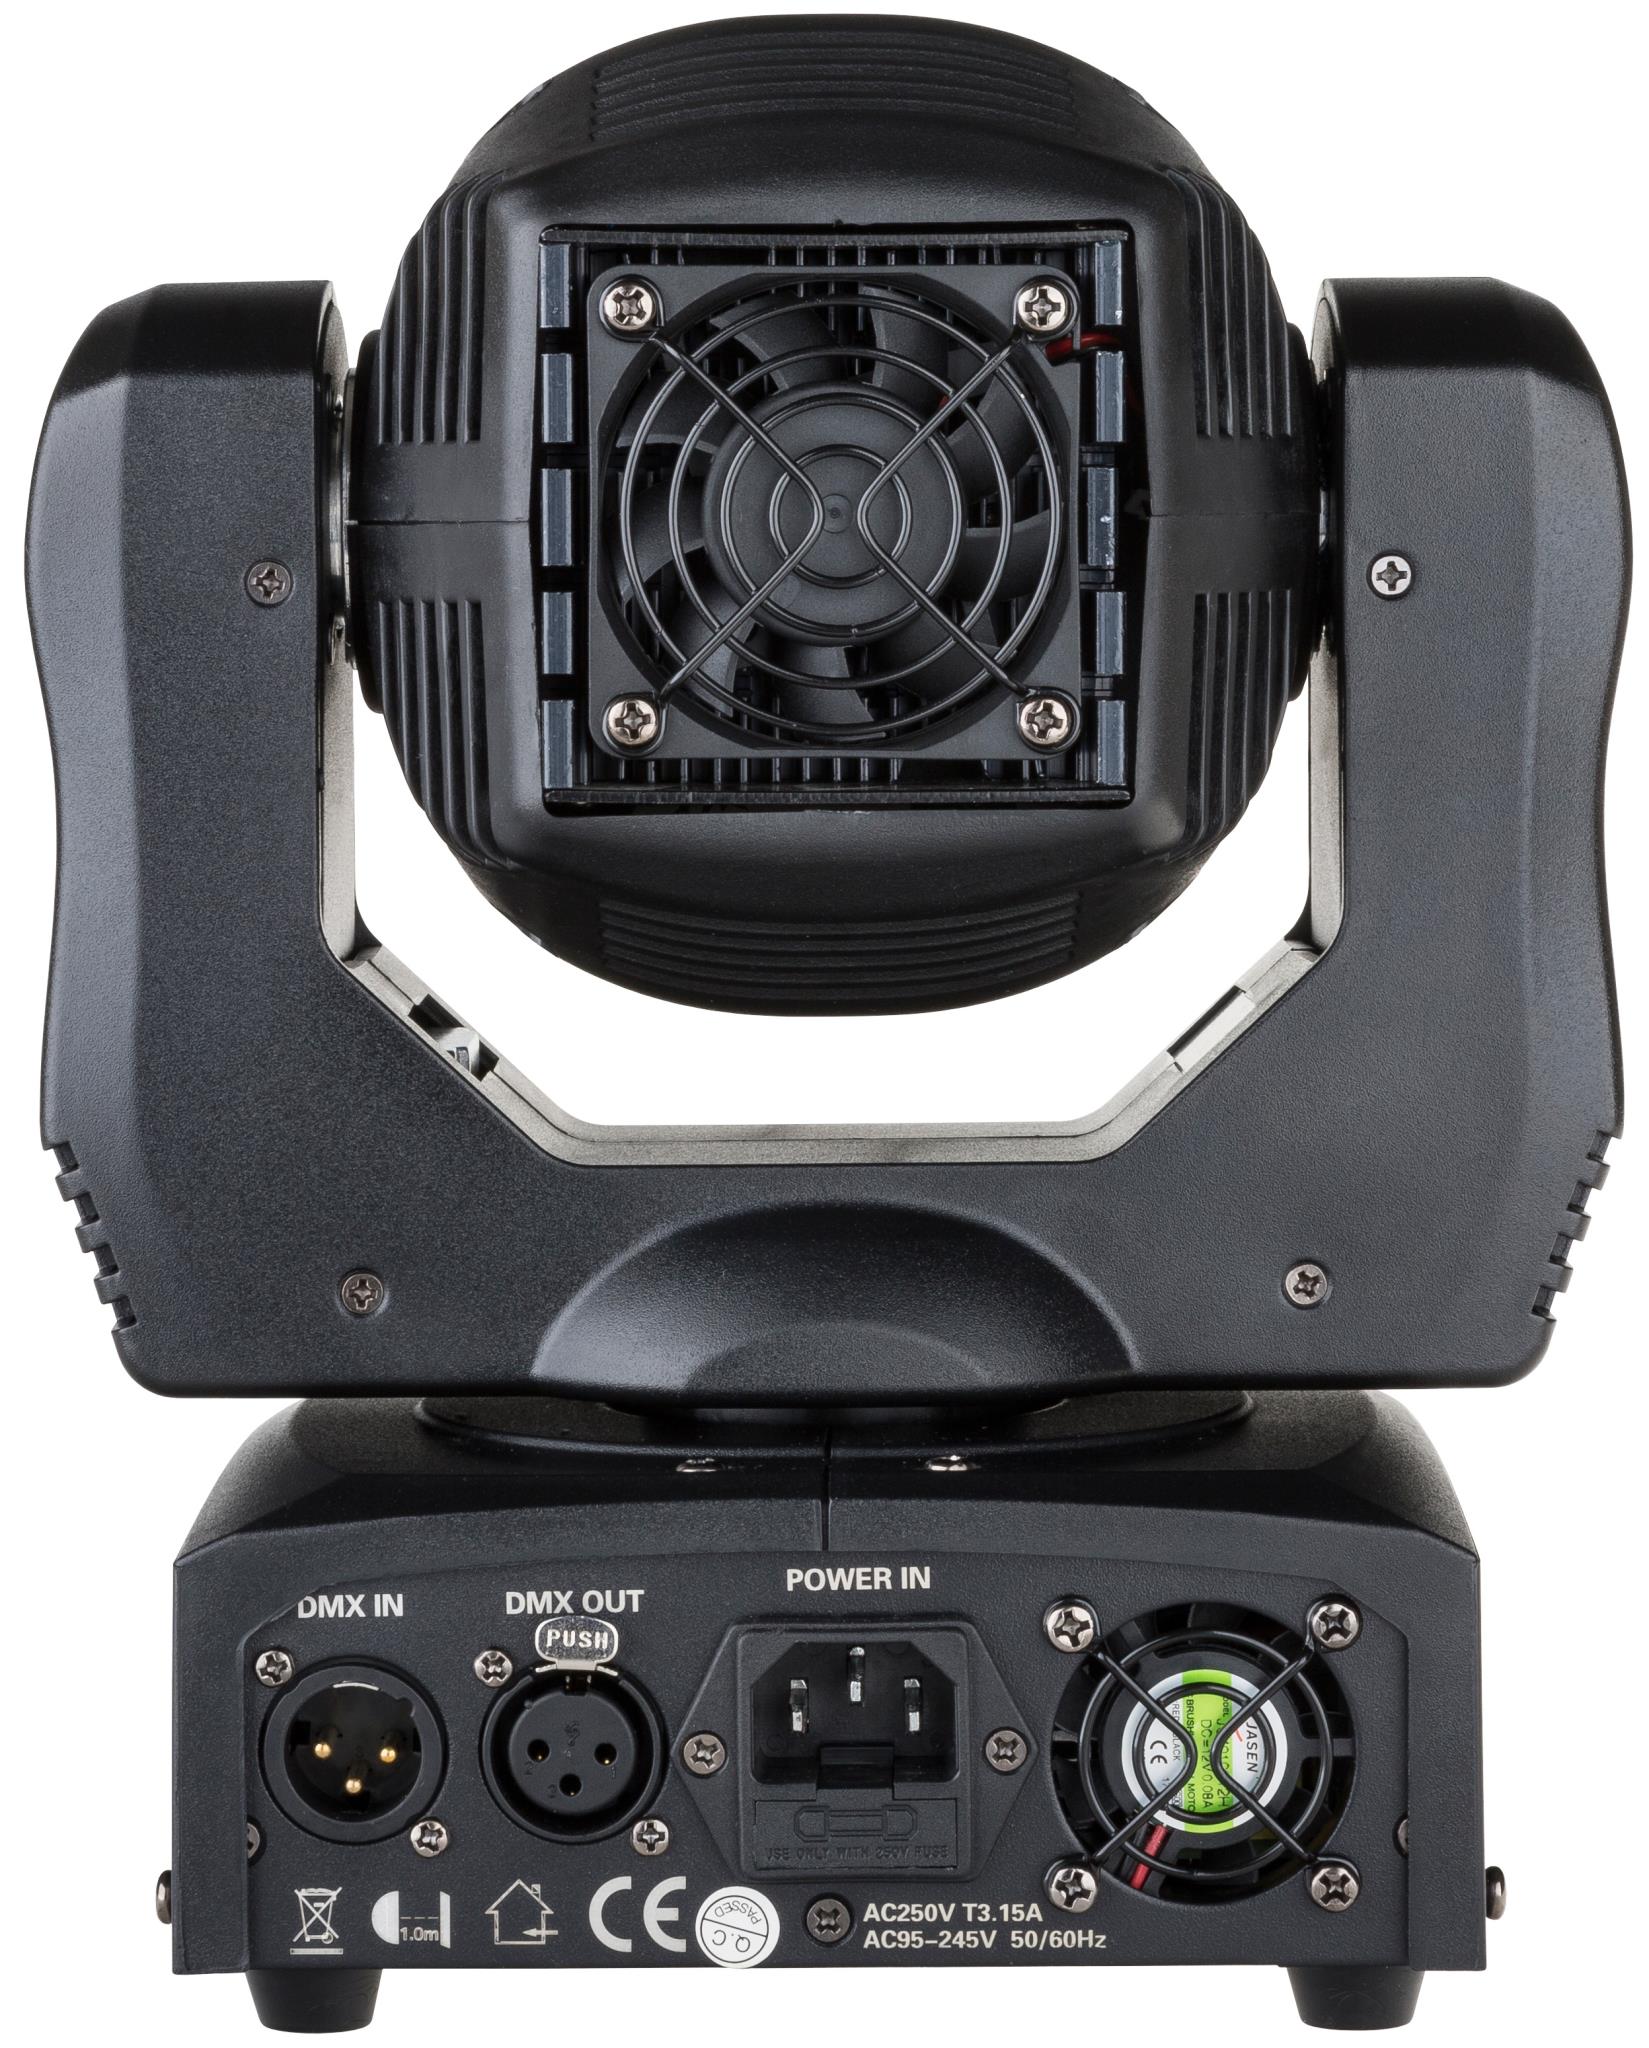 MOVING HEAD JB SYSTEMS CLUBSPOT